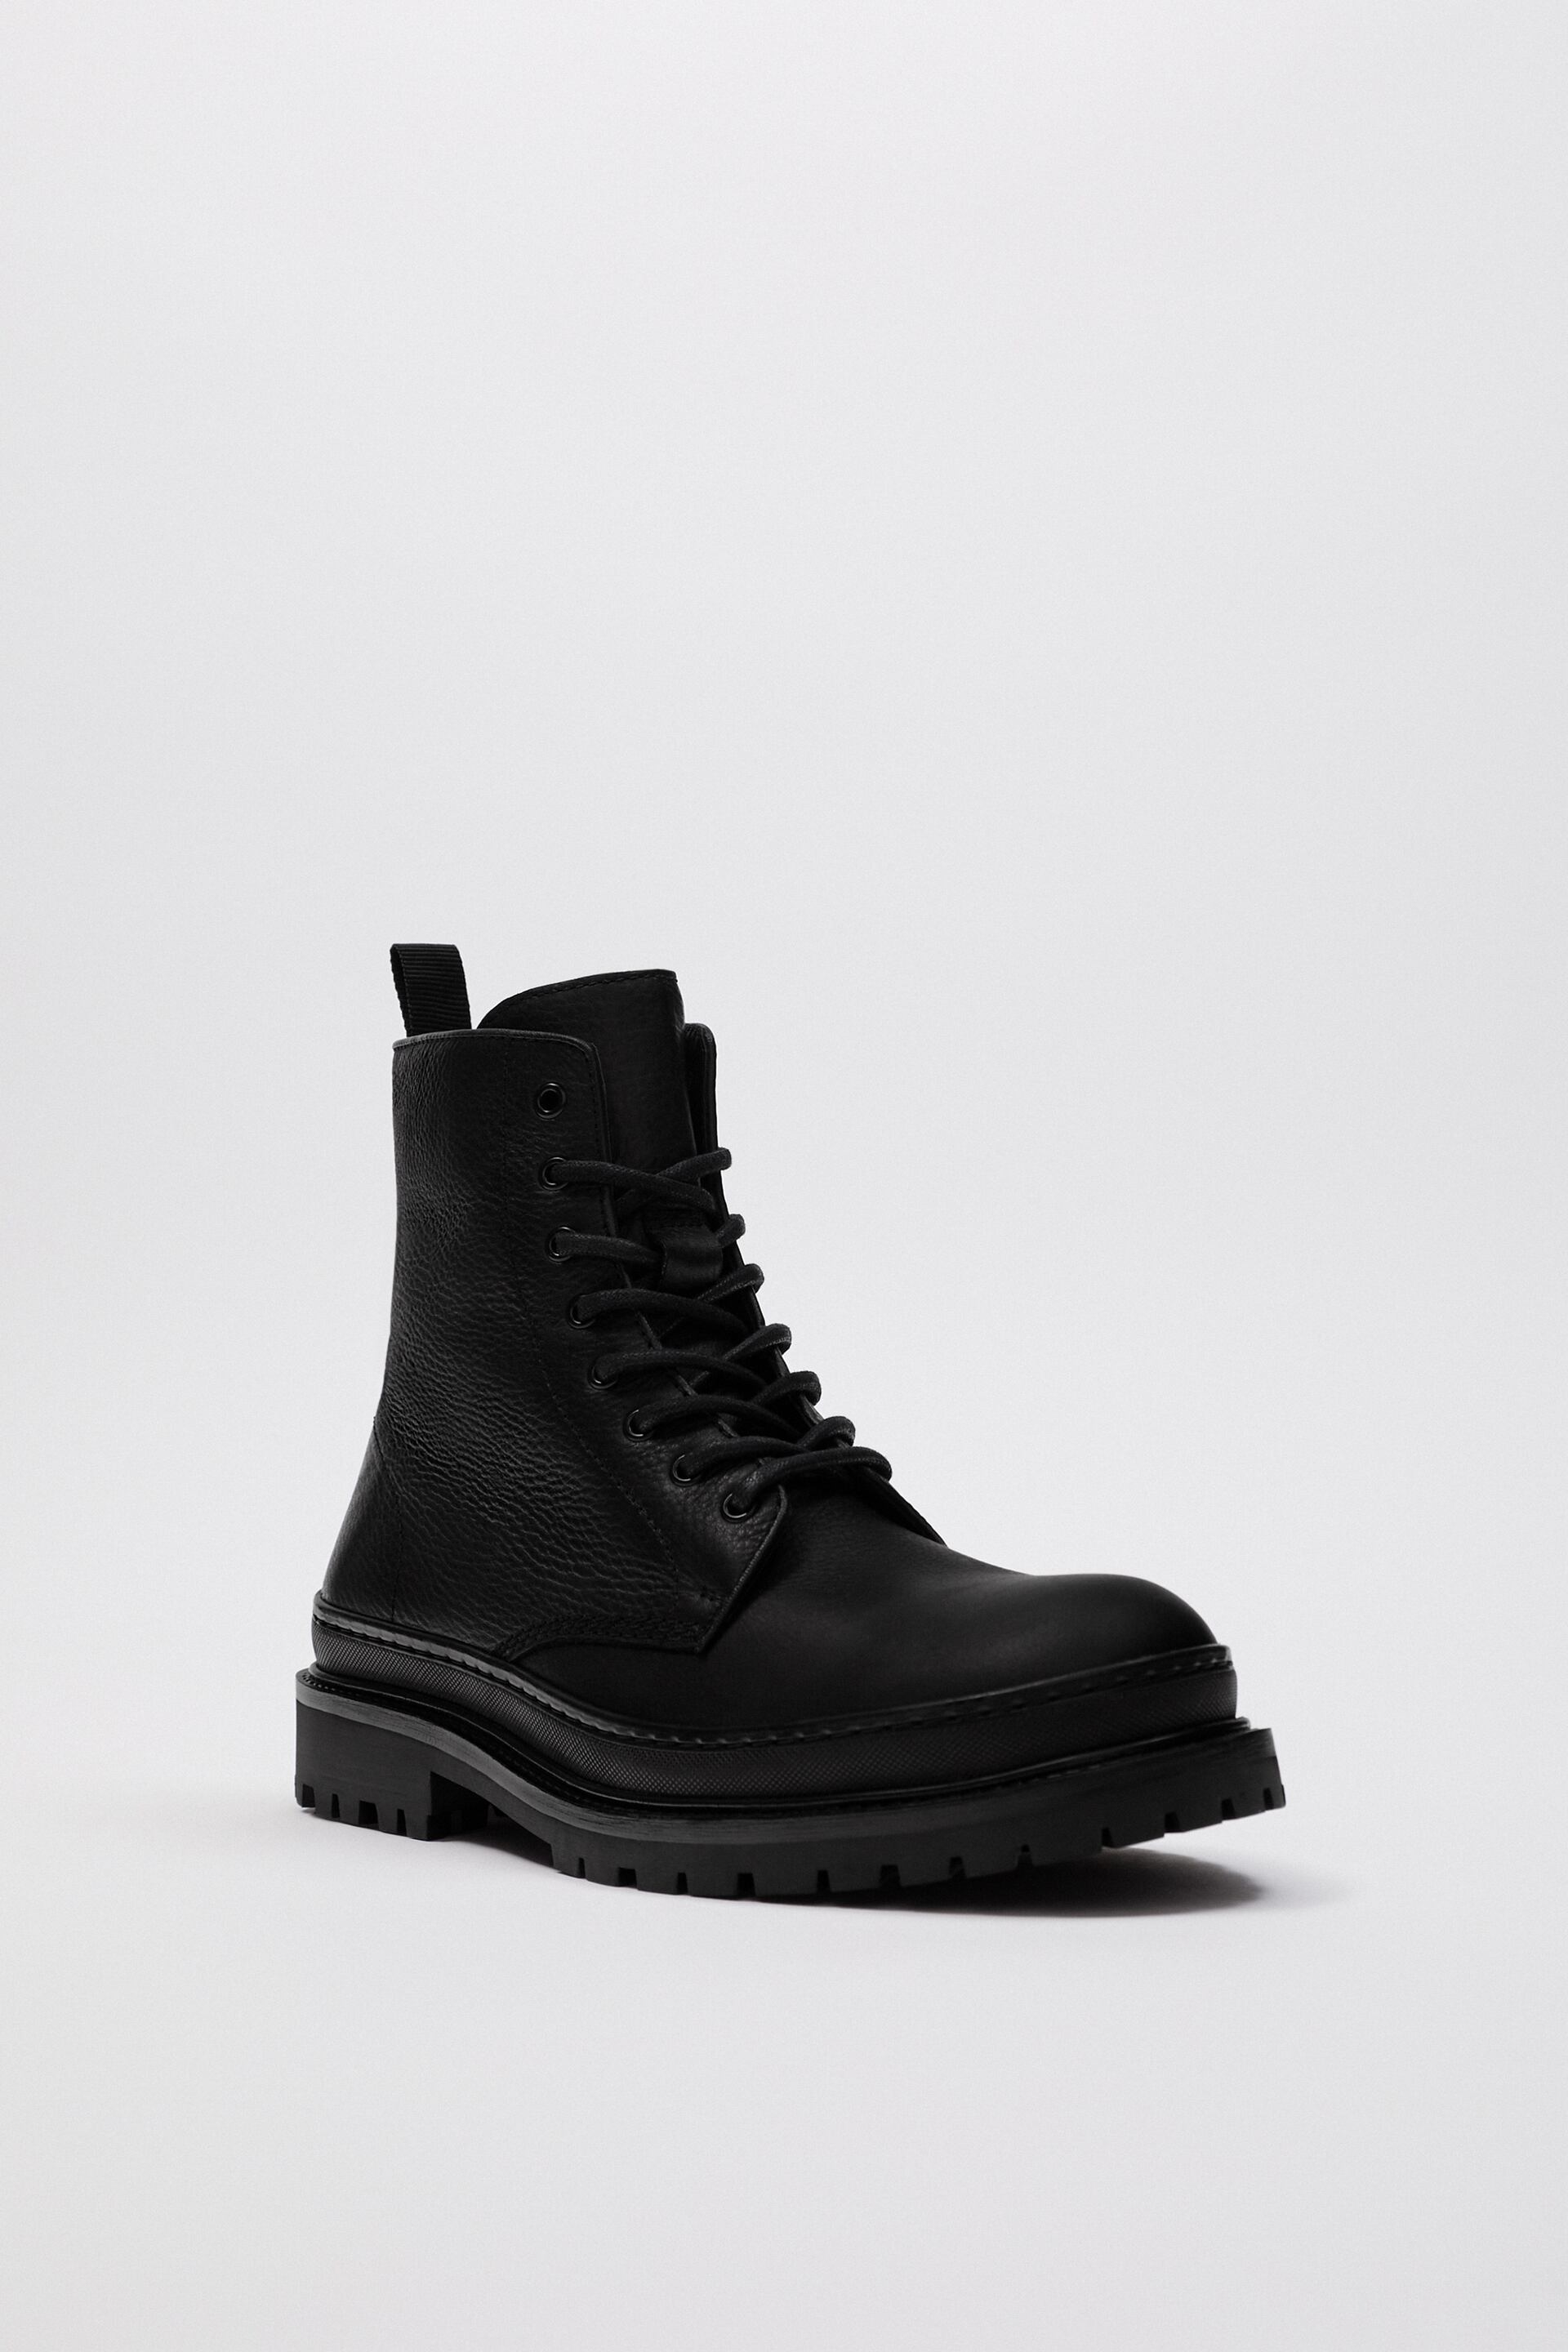 THICK SOLED LACED LEATHER BOOTS